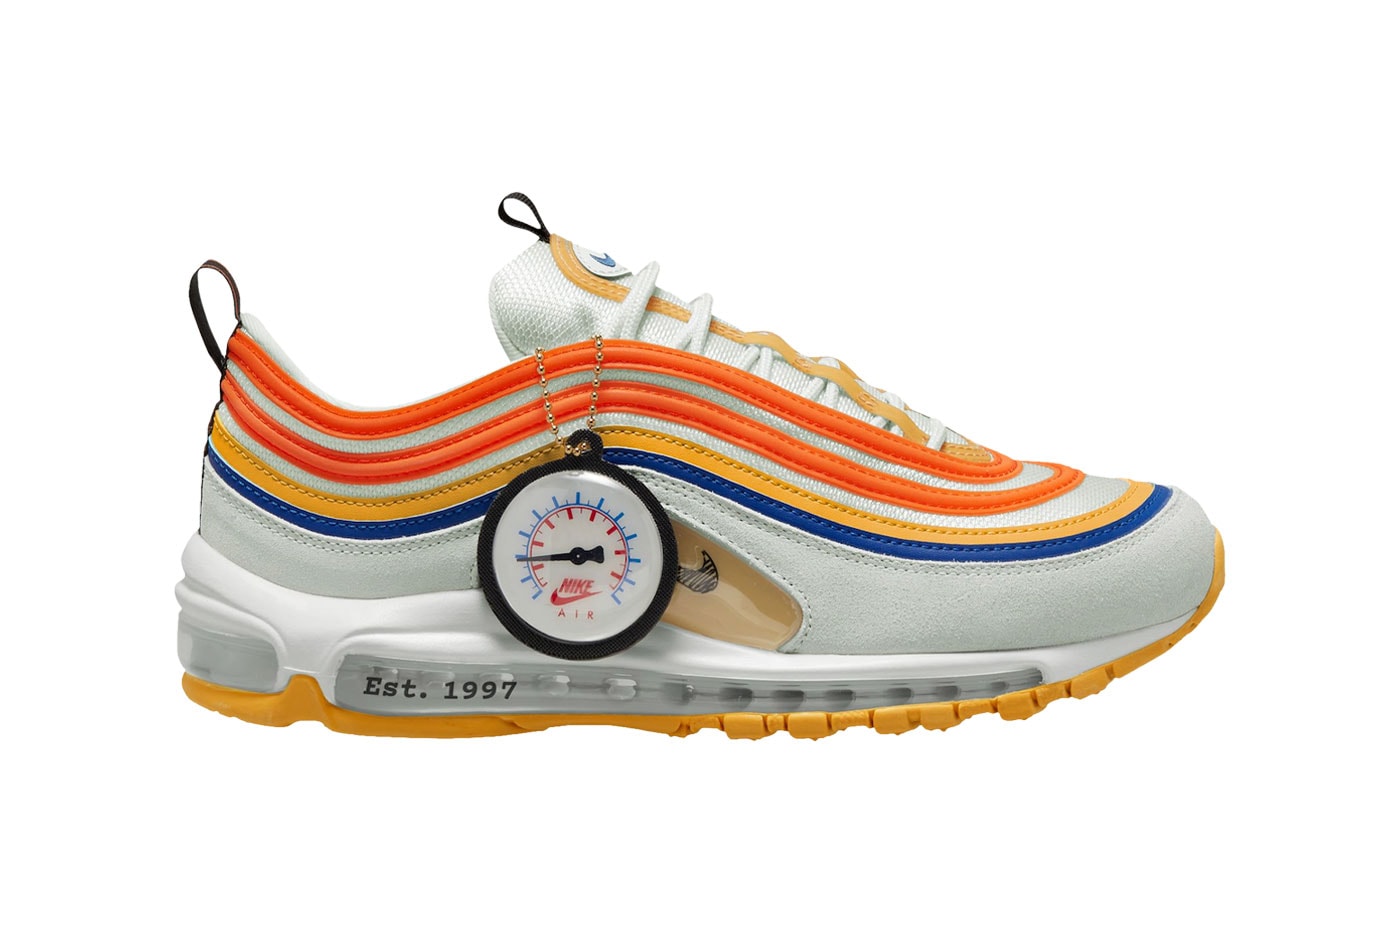 Latest Max 97 Celebrates the of Air Technology | Hypebeast